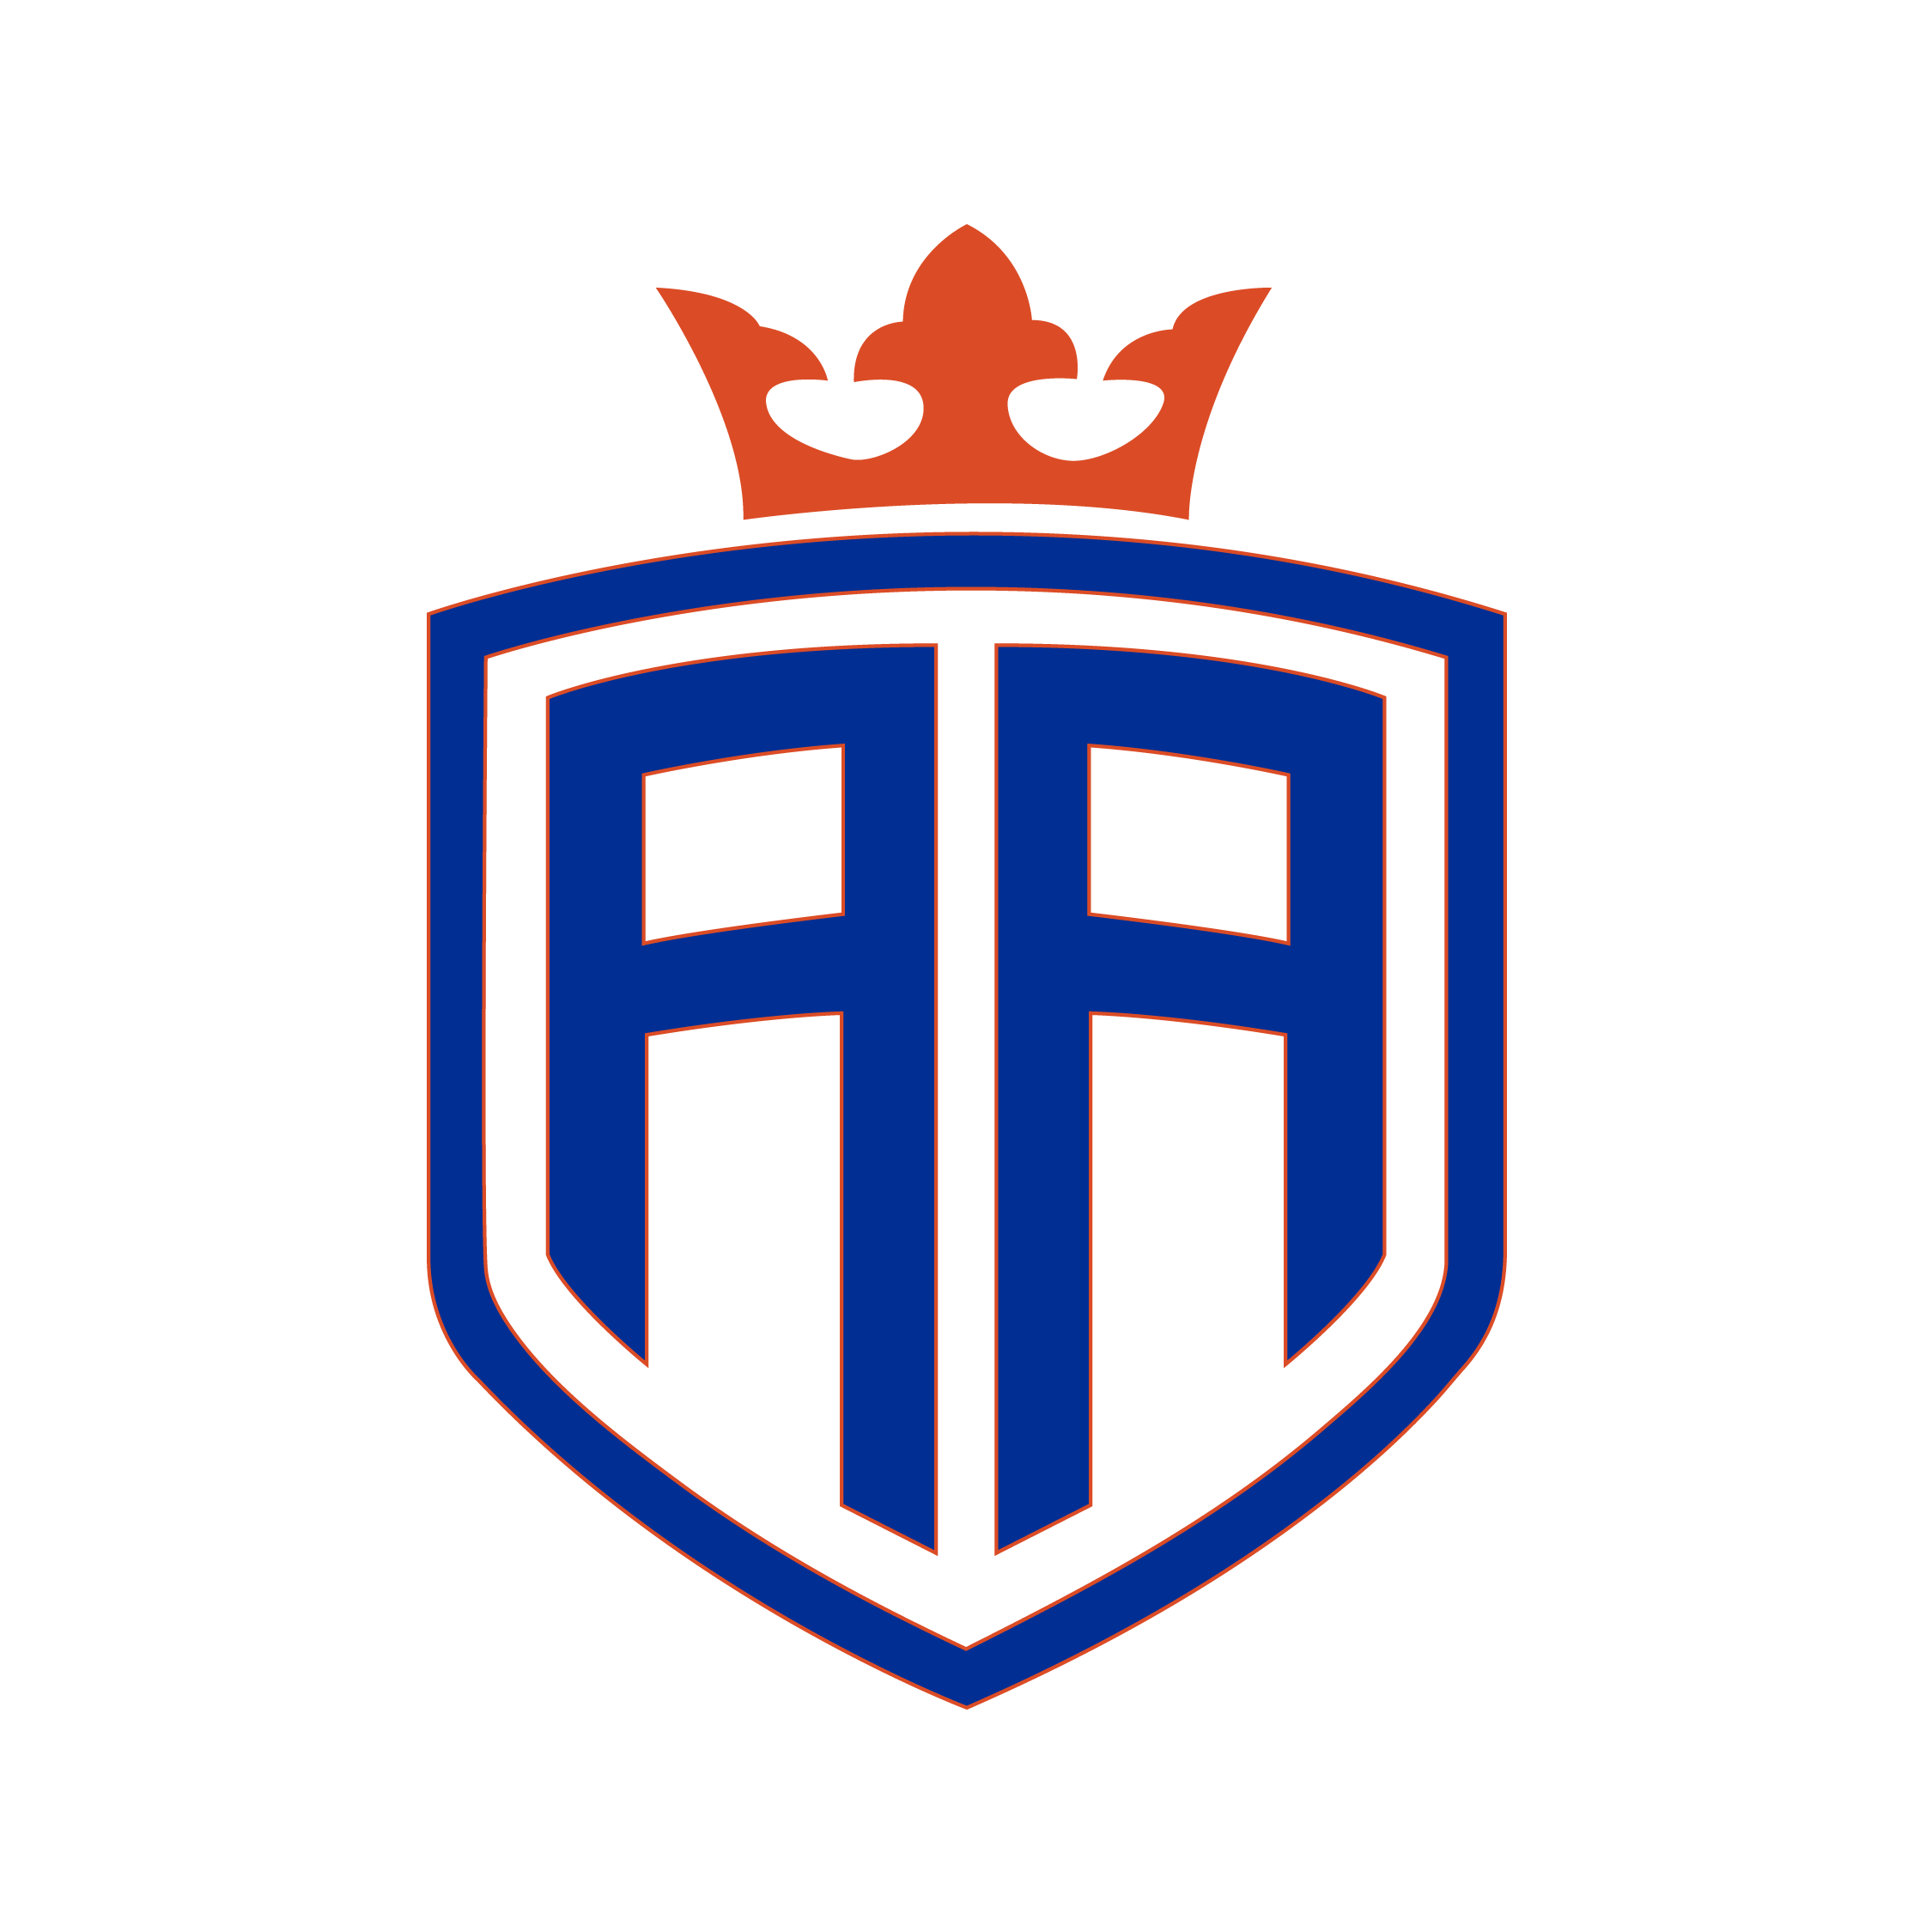 A blue and red logo with an orange crown.